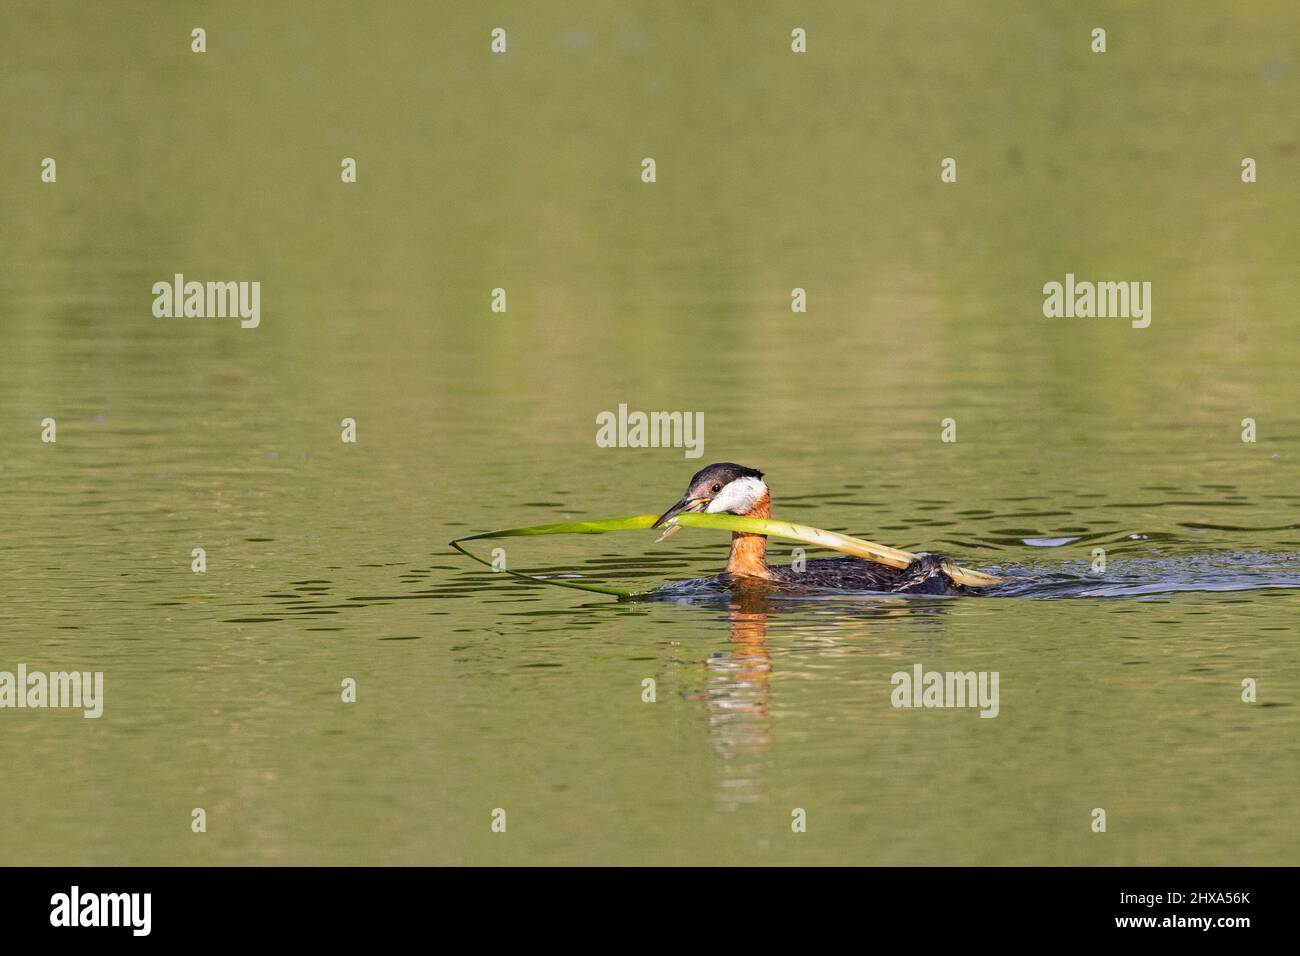 Red-necked Grebe swimming through a pond and carrying a cattail leaf in its bill for nesting material. Podiceps grisegena. Stock Photo